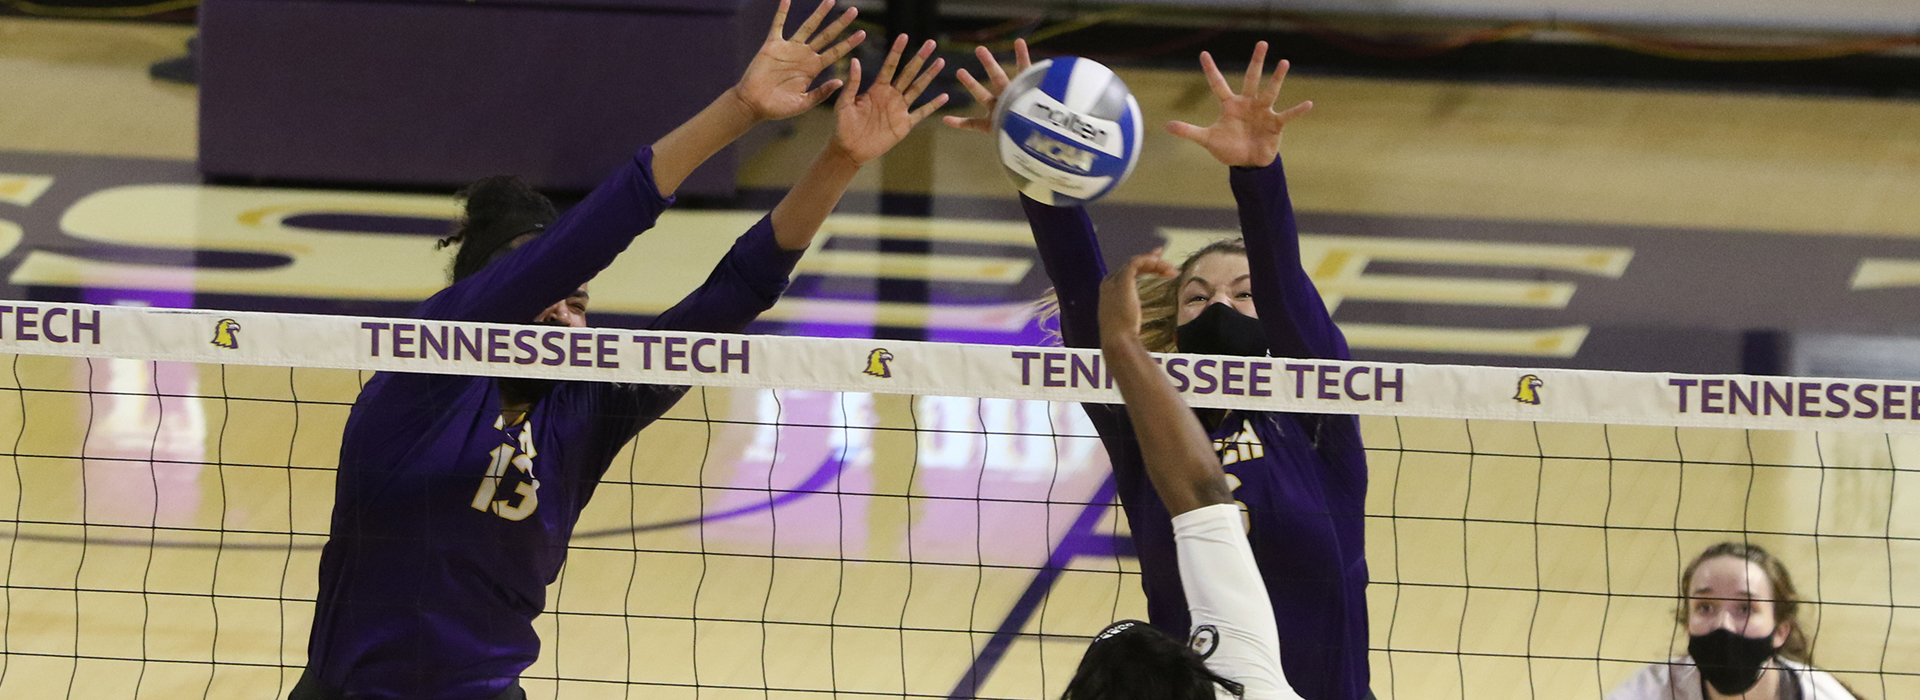 Home sweet home: Golden Eagles open play in Eblen Center with sweep of EIU